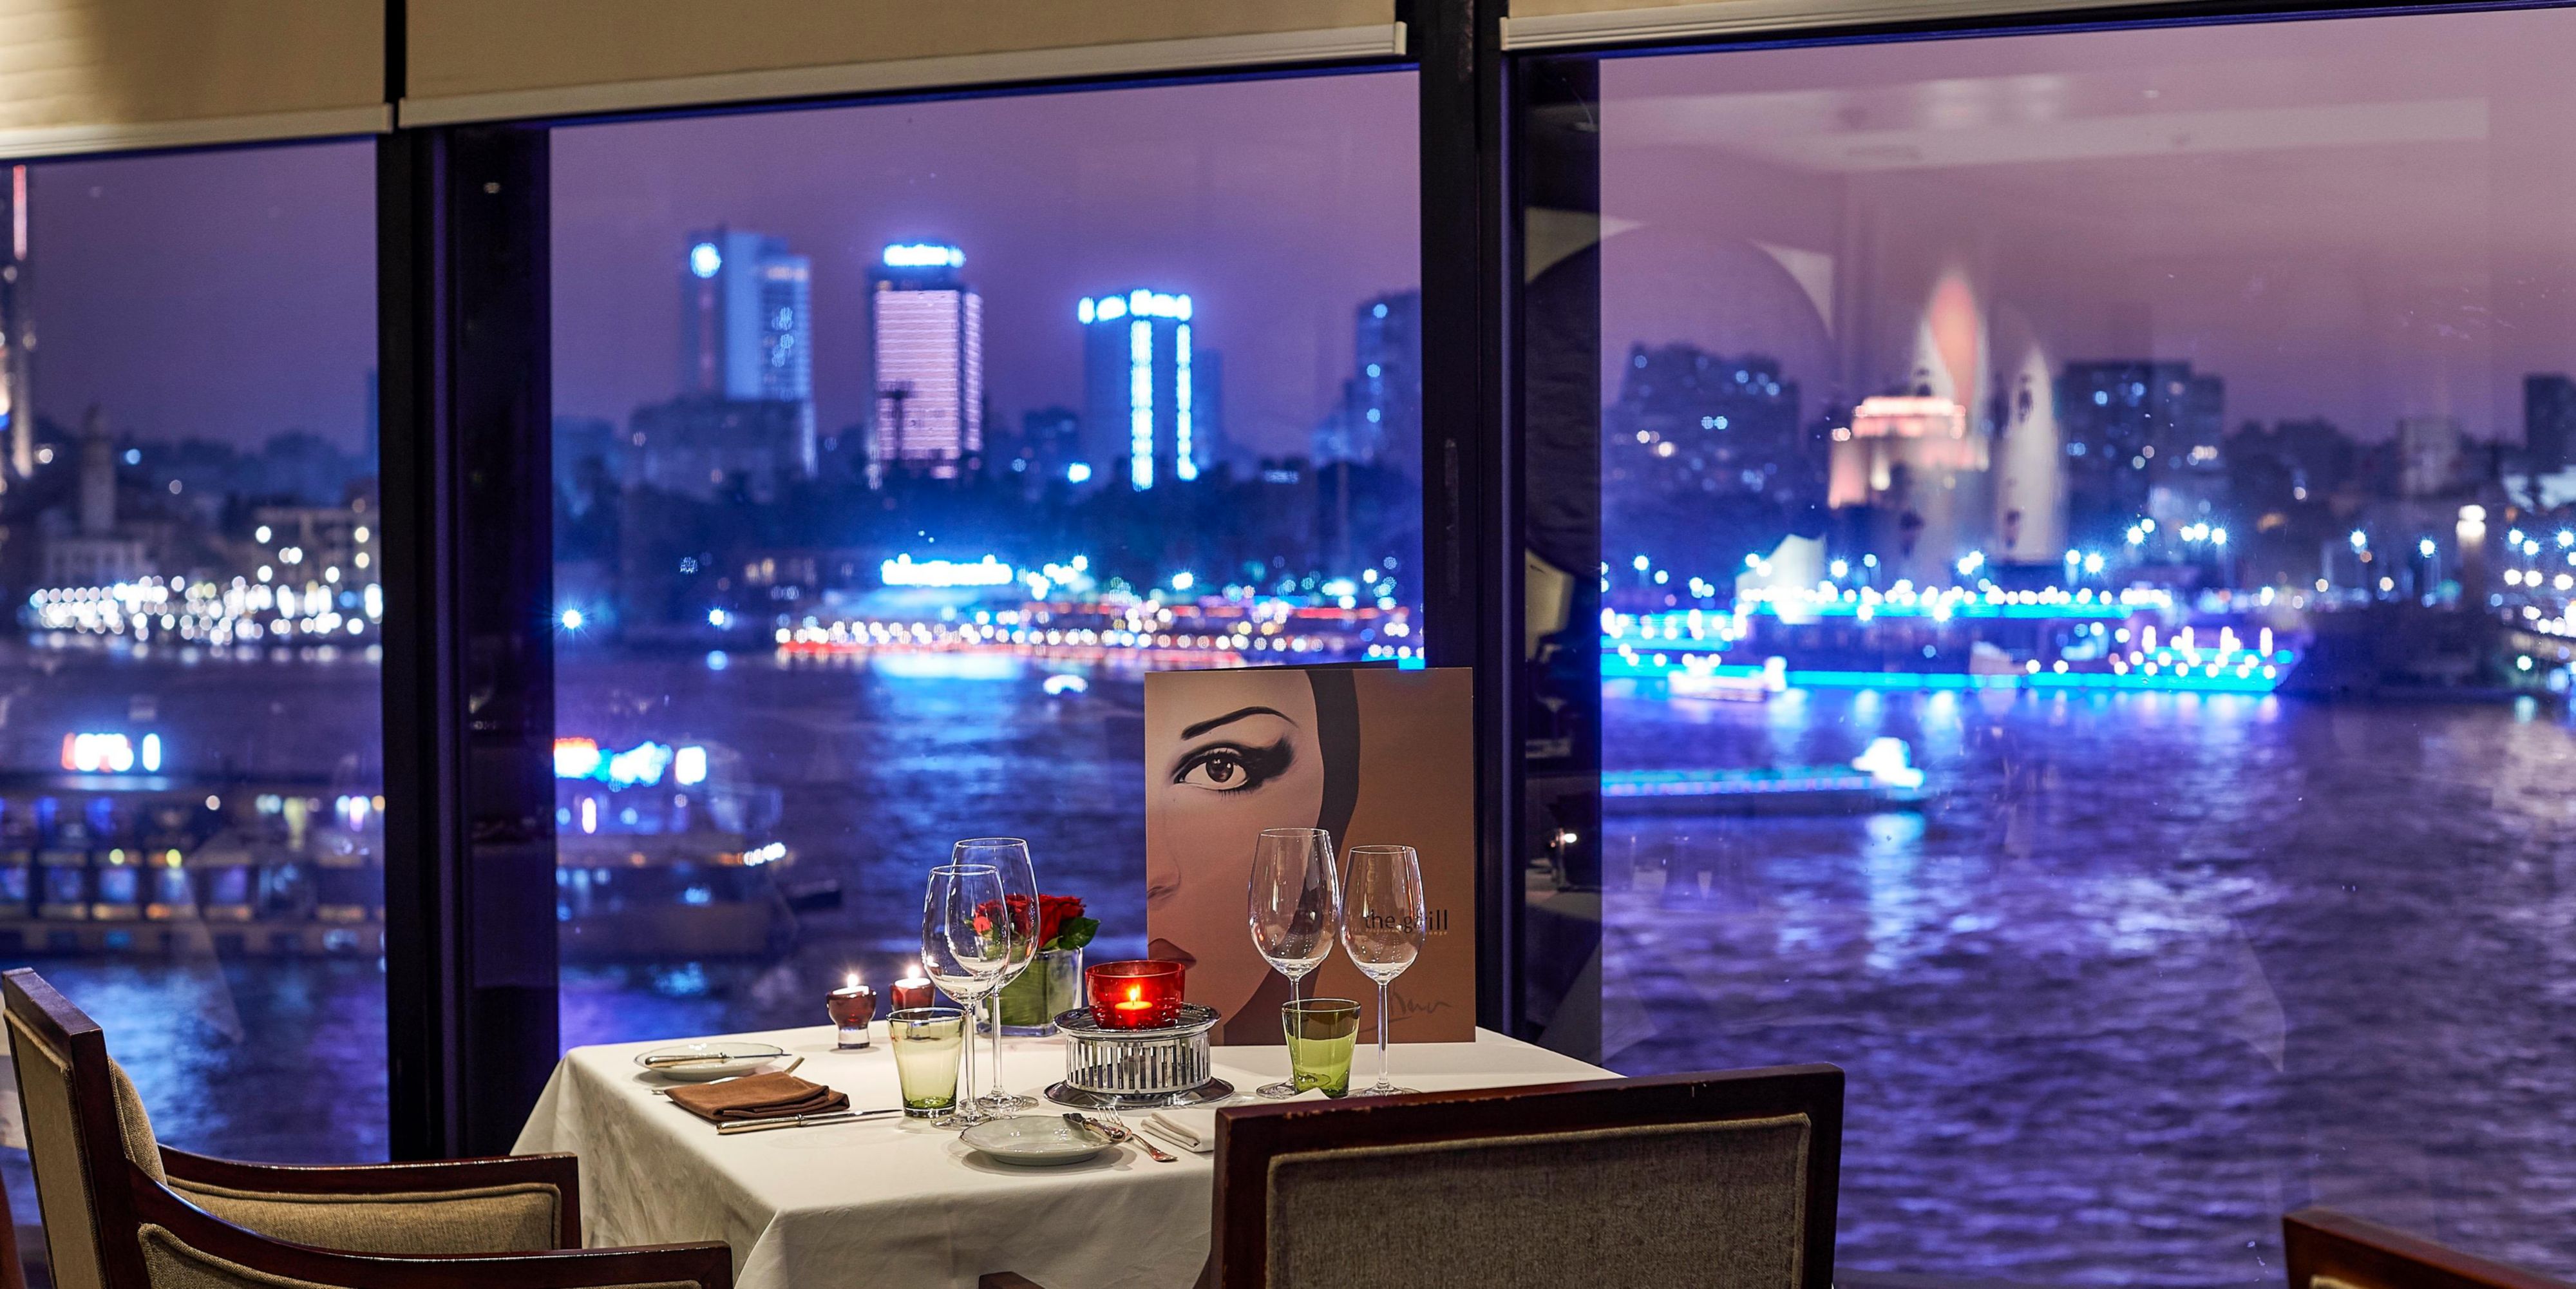 With its panoramic Nile views, elegant seating, and exquisite cuisine, the Grill is celebrated as one of the most romantic restaurants in Cairo! Open daily from 7 pm to midnight. To reserve your table, call 0227988188